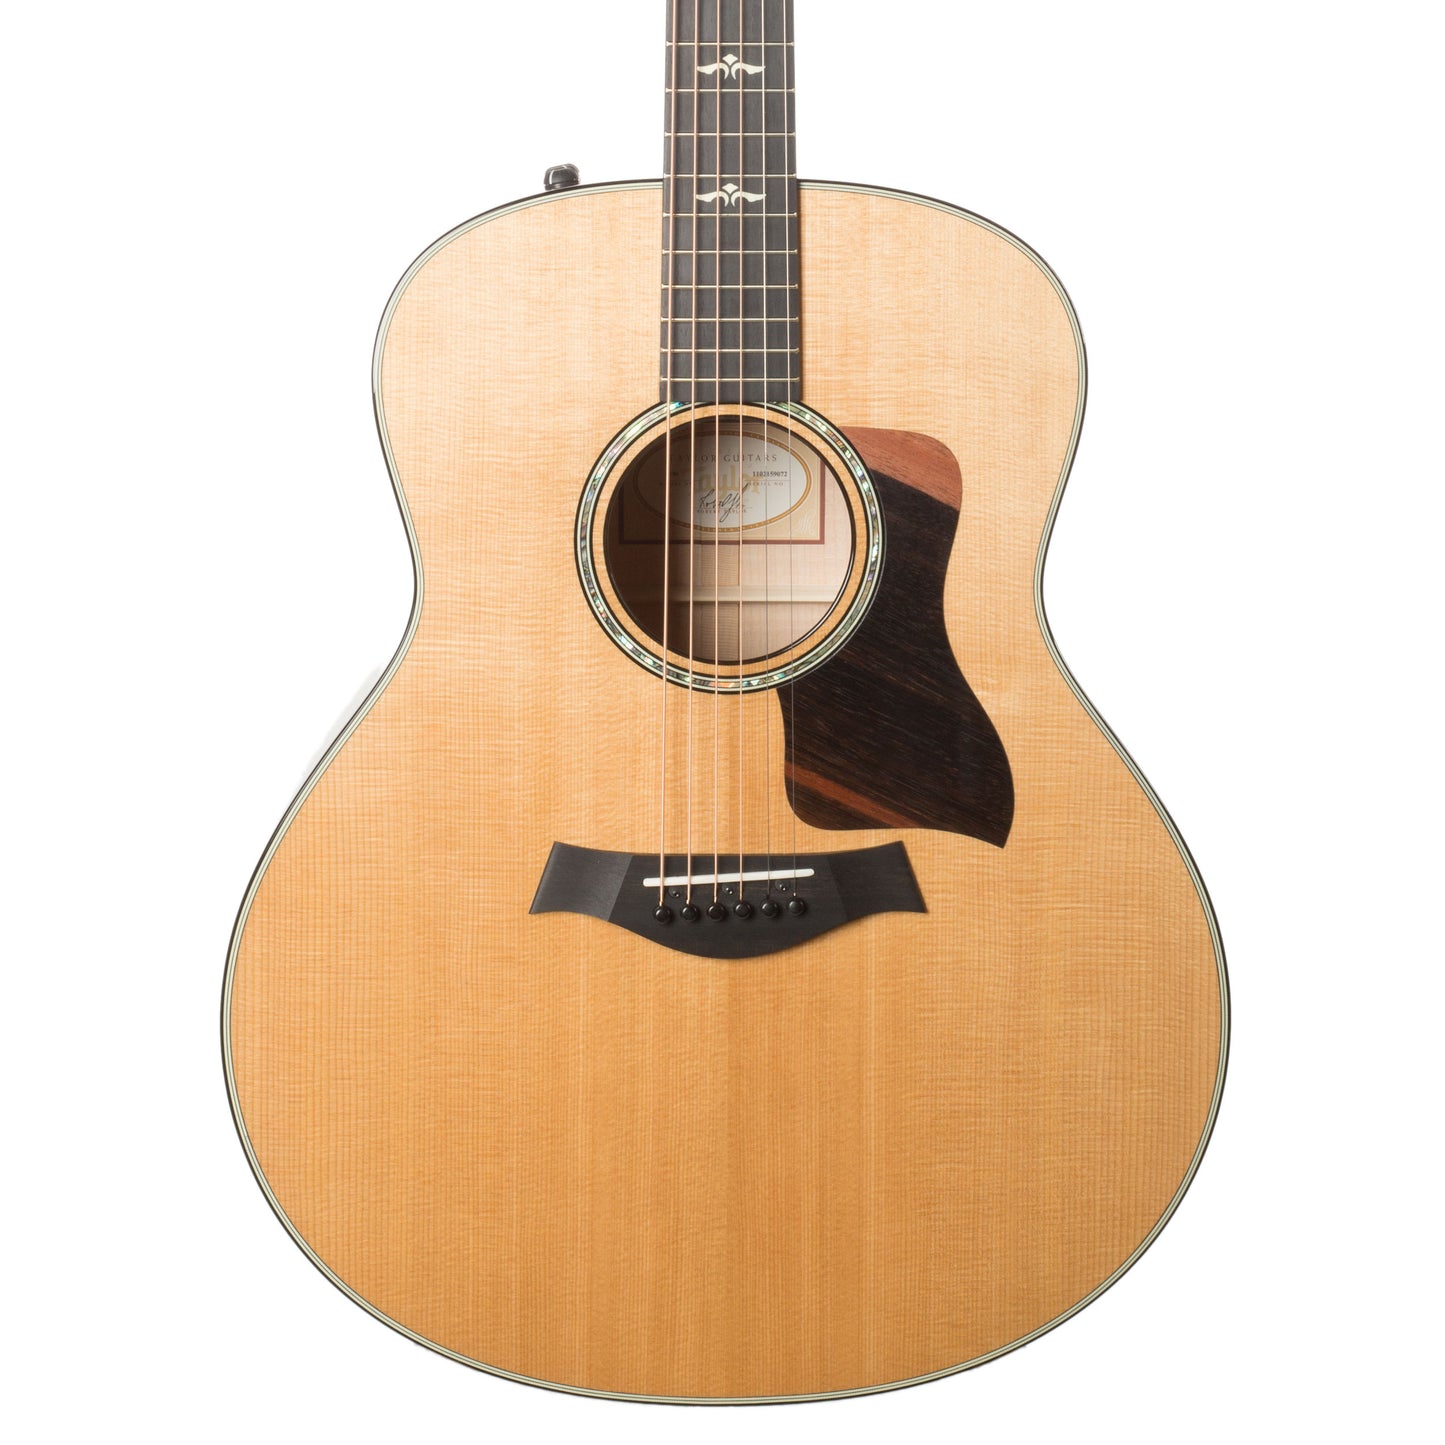 Taylor 618e Grand Orchestra V-Class Acoustic Electric Guitar, Maple